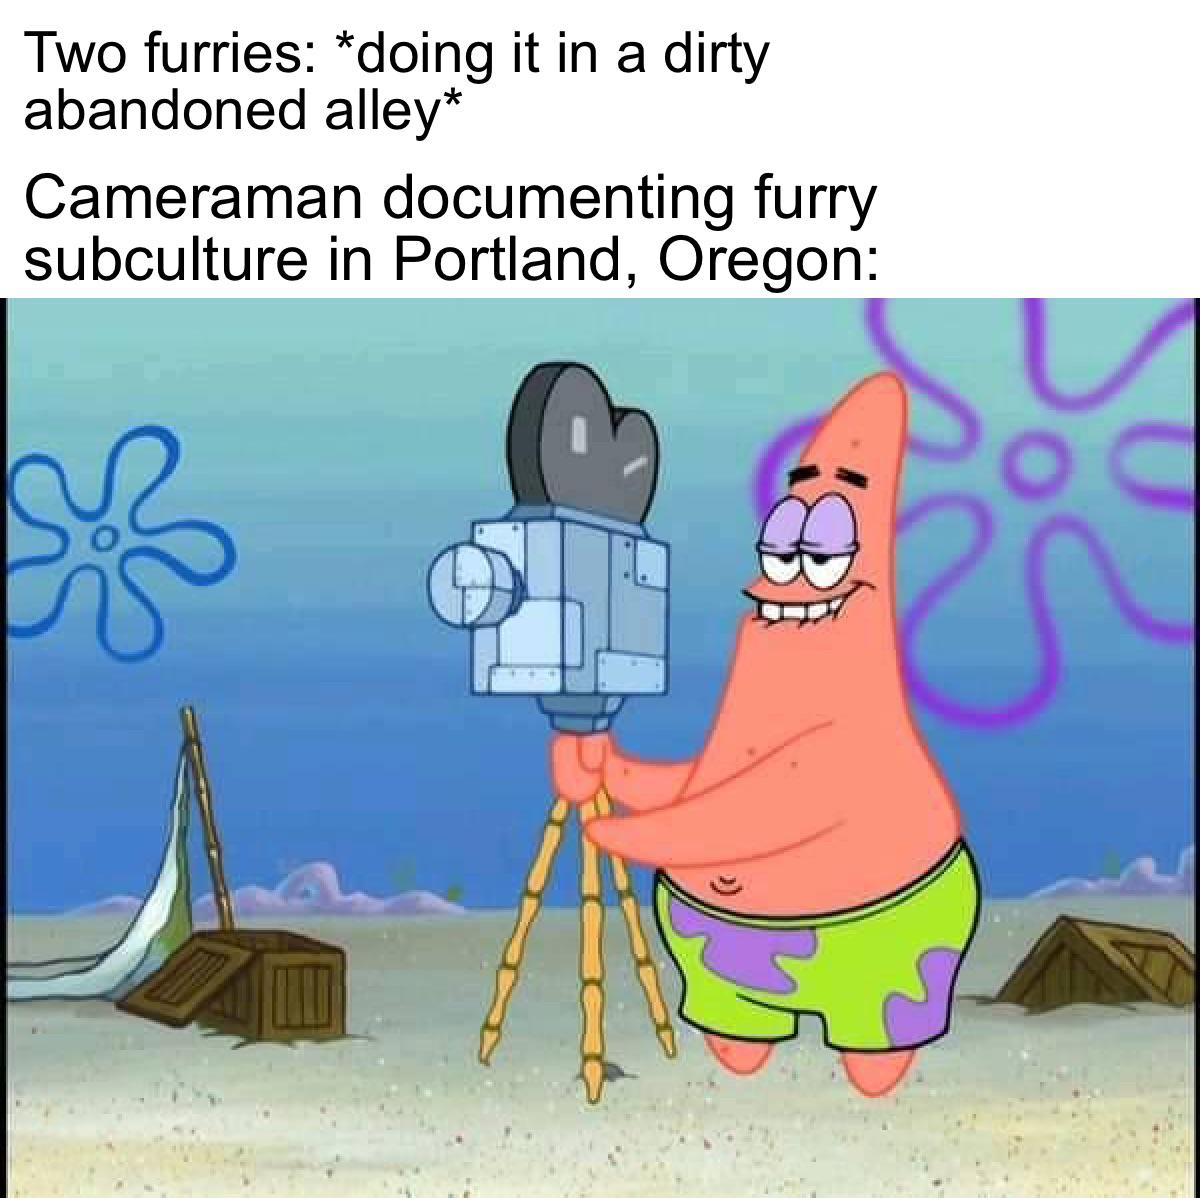 spongebob - Two furries doing it in a dirty abandoned alley Cameraman documenting furry subculture in Portland, Oregon c